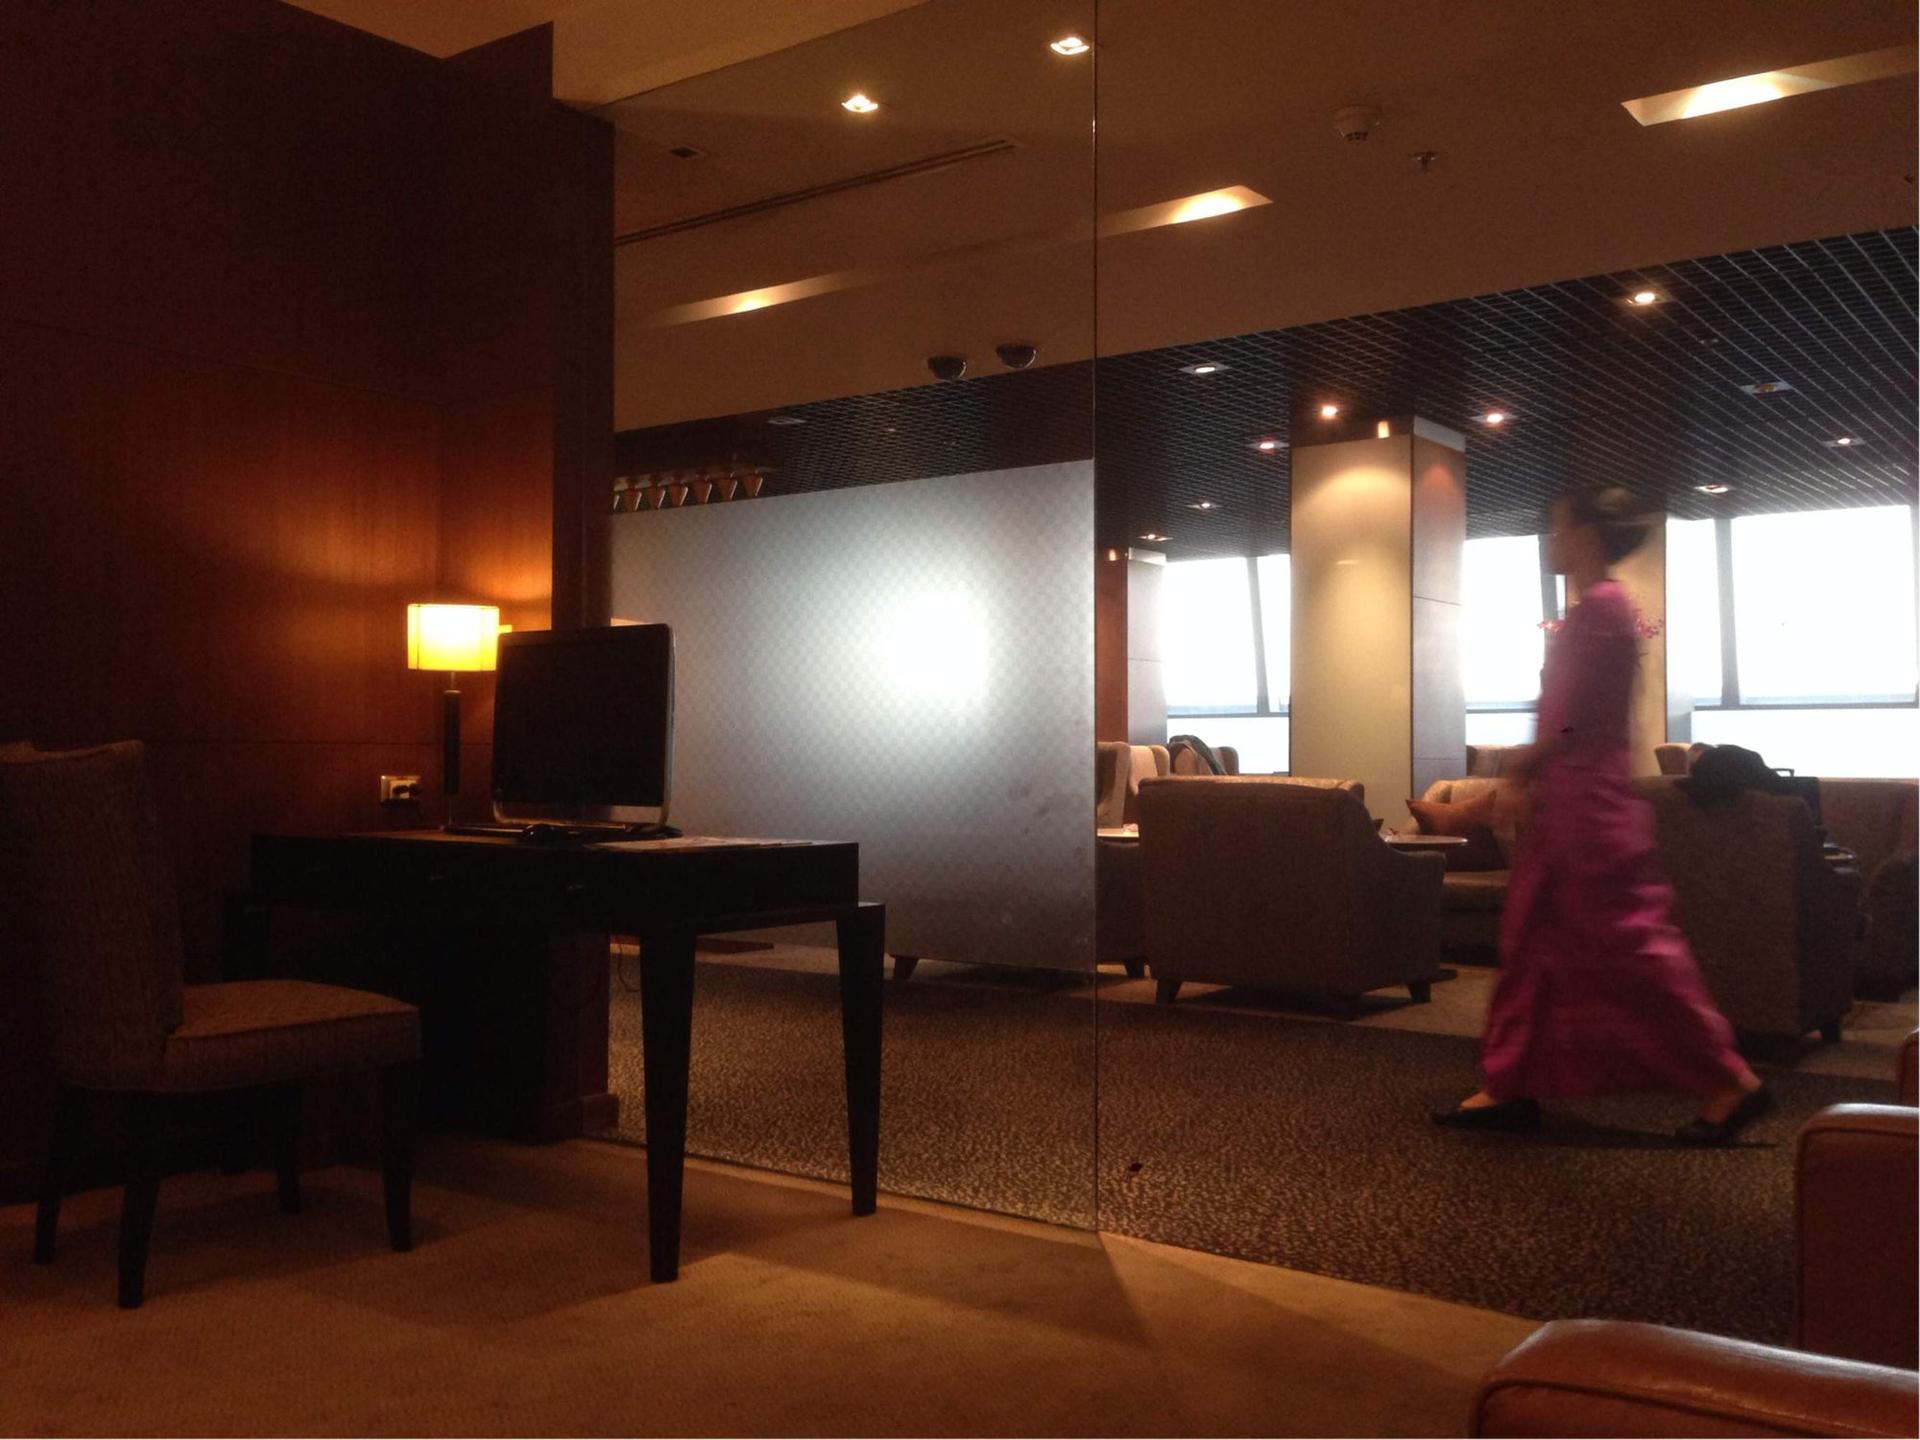 Thai Airways Royal First Class Lounge image 2 of 44